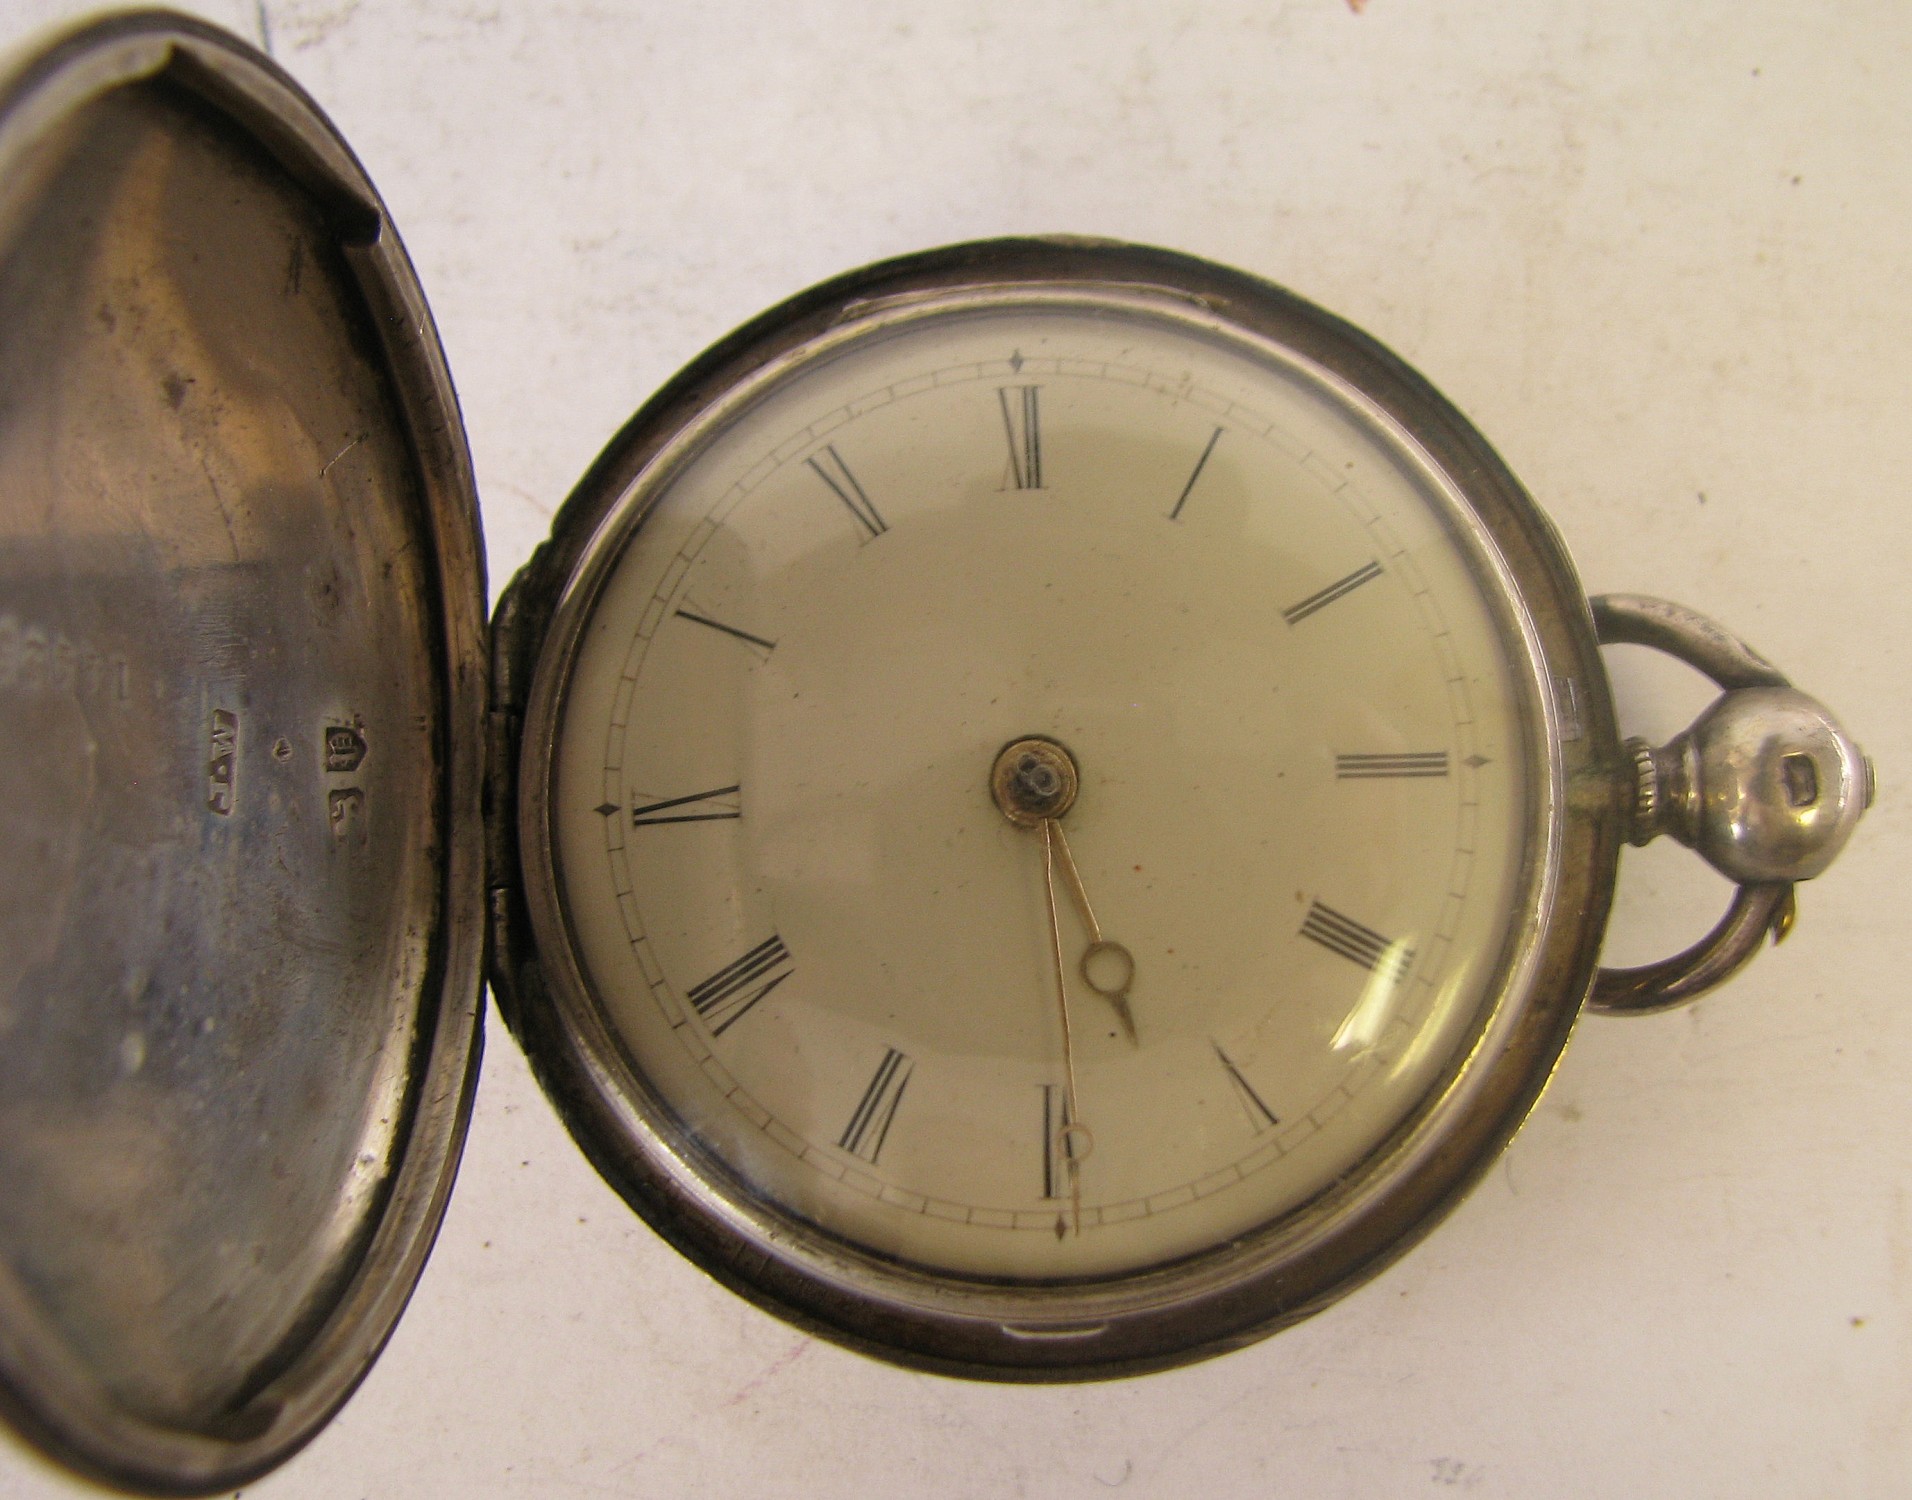 W. Owen, Oswestry, Silver Open Faced Pocket Watch having white enamelled dial with Roman numerals